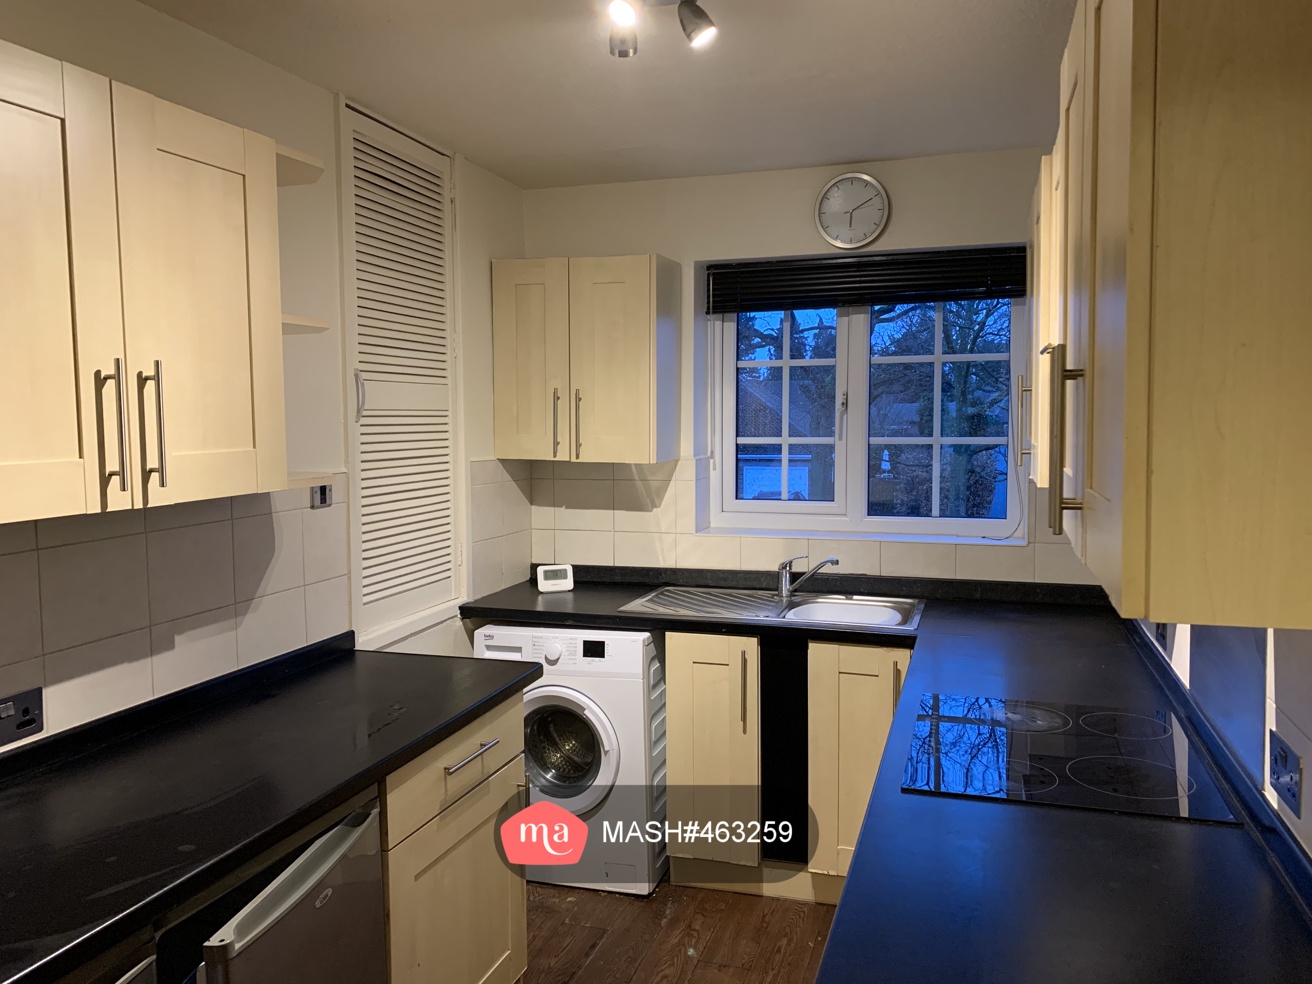 2 Bedroom Flat to rent in Cheadle - Mashroom